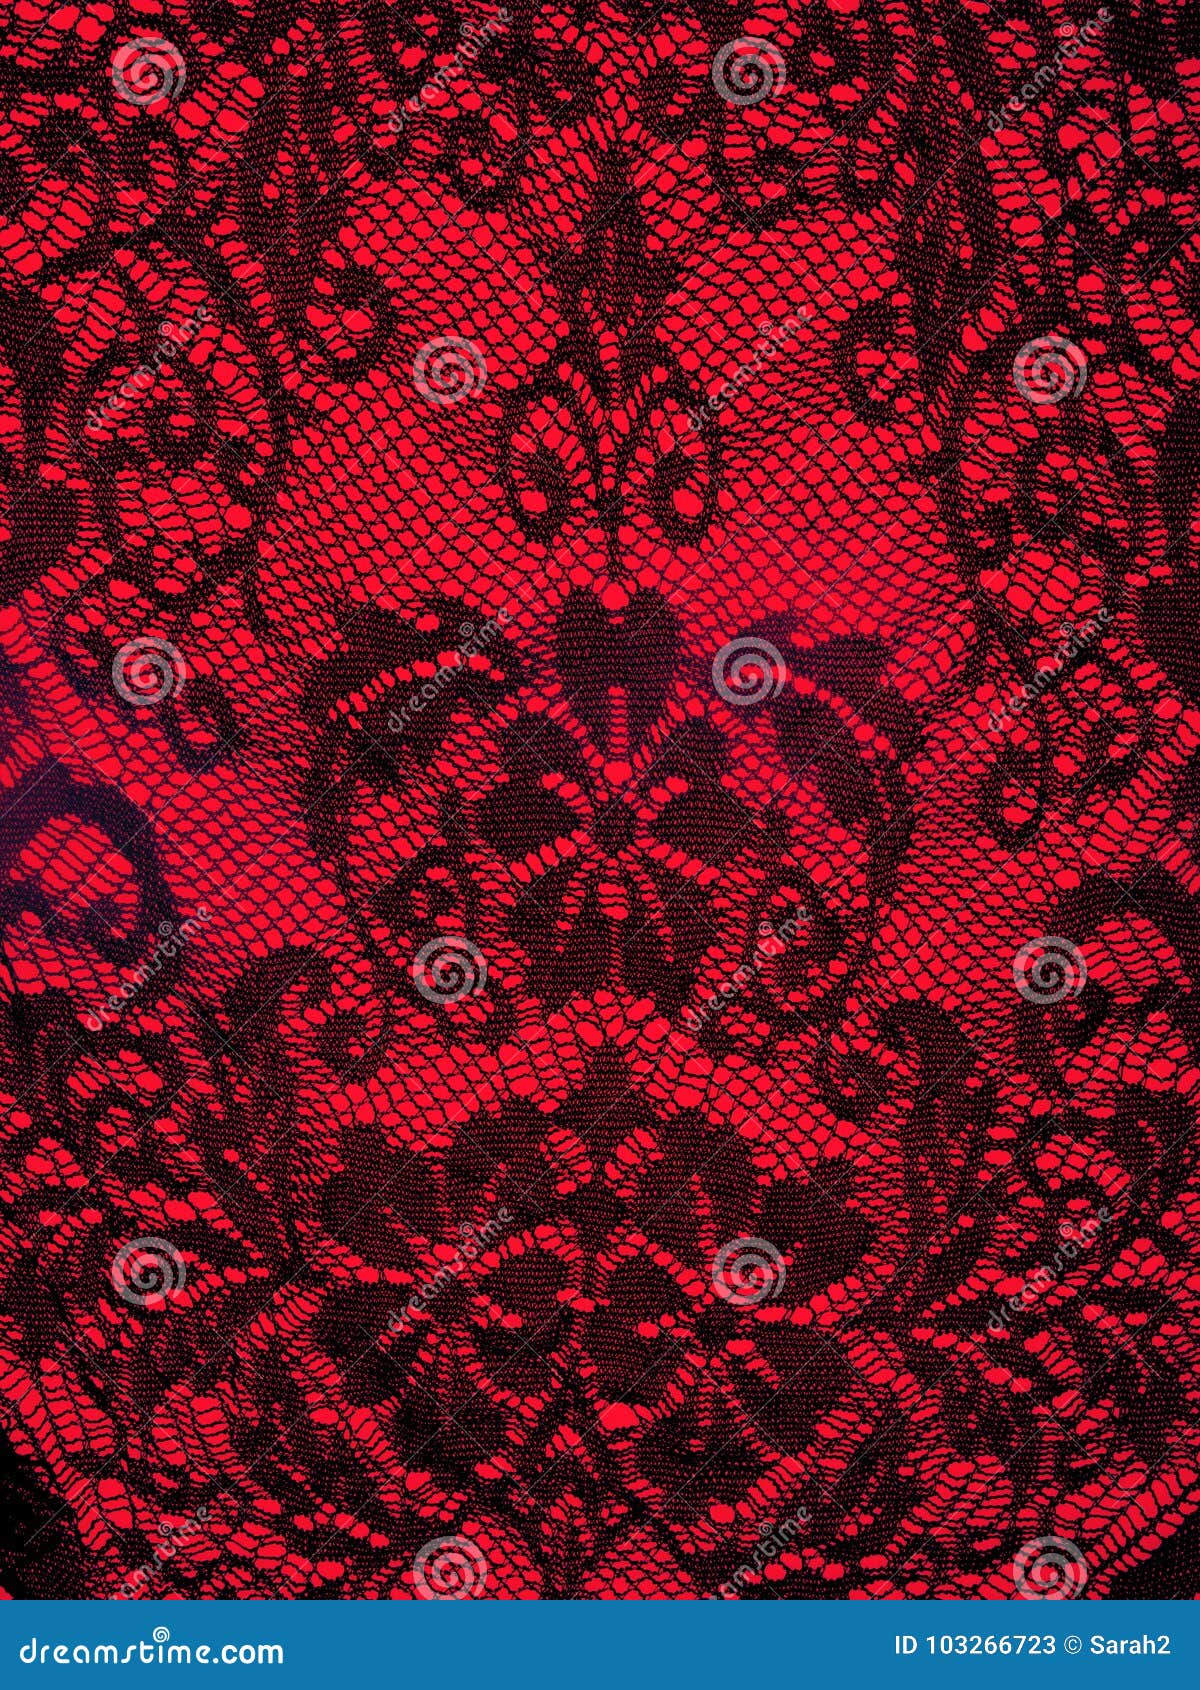 Black Lace on Red Background. Stock Image - Image of floral, black ...